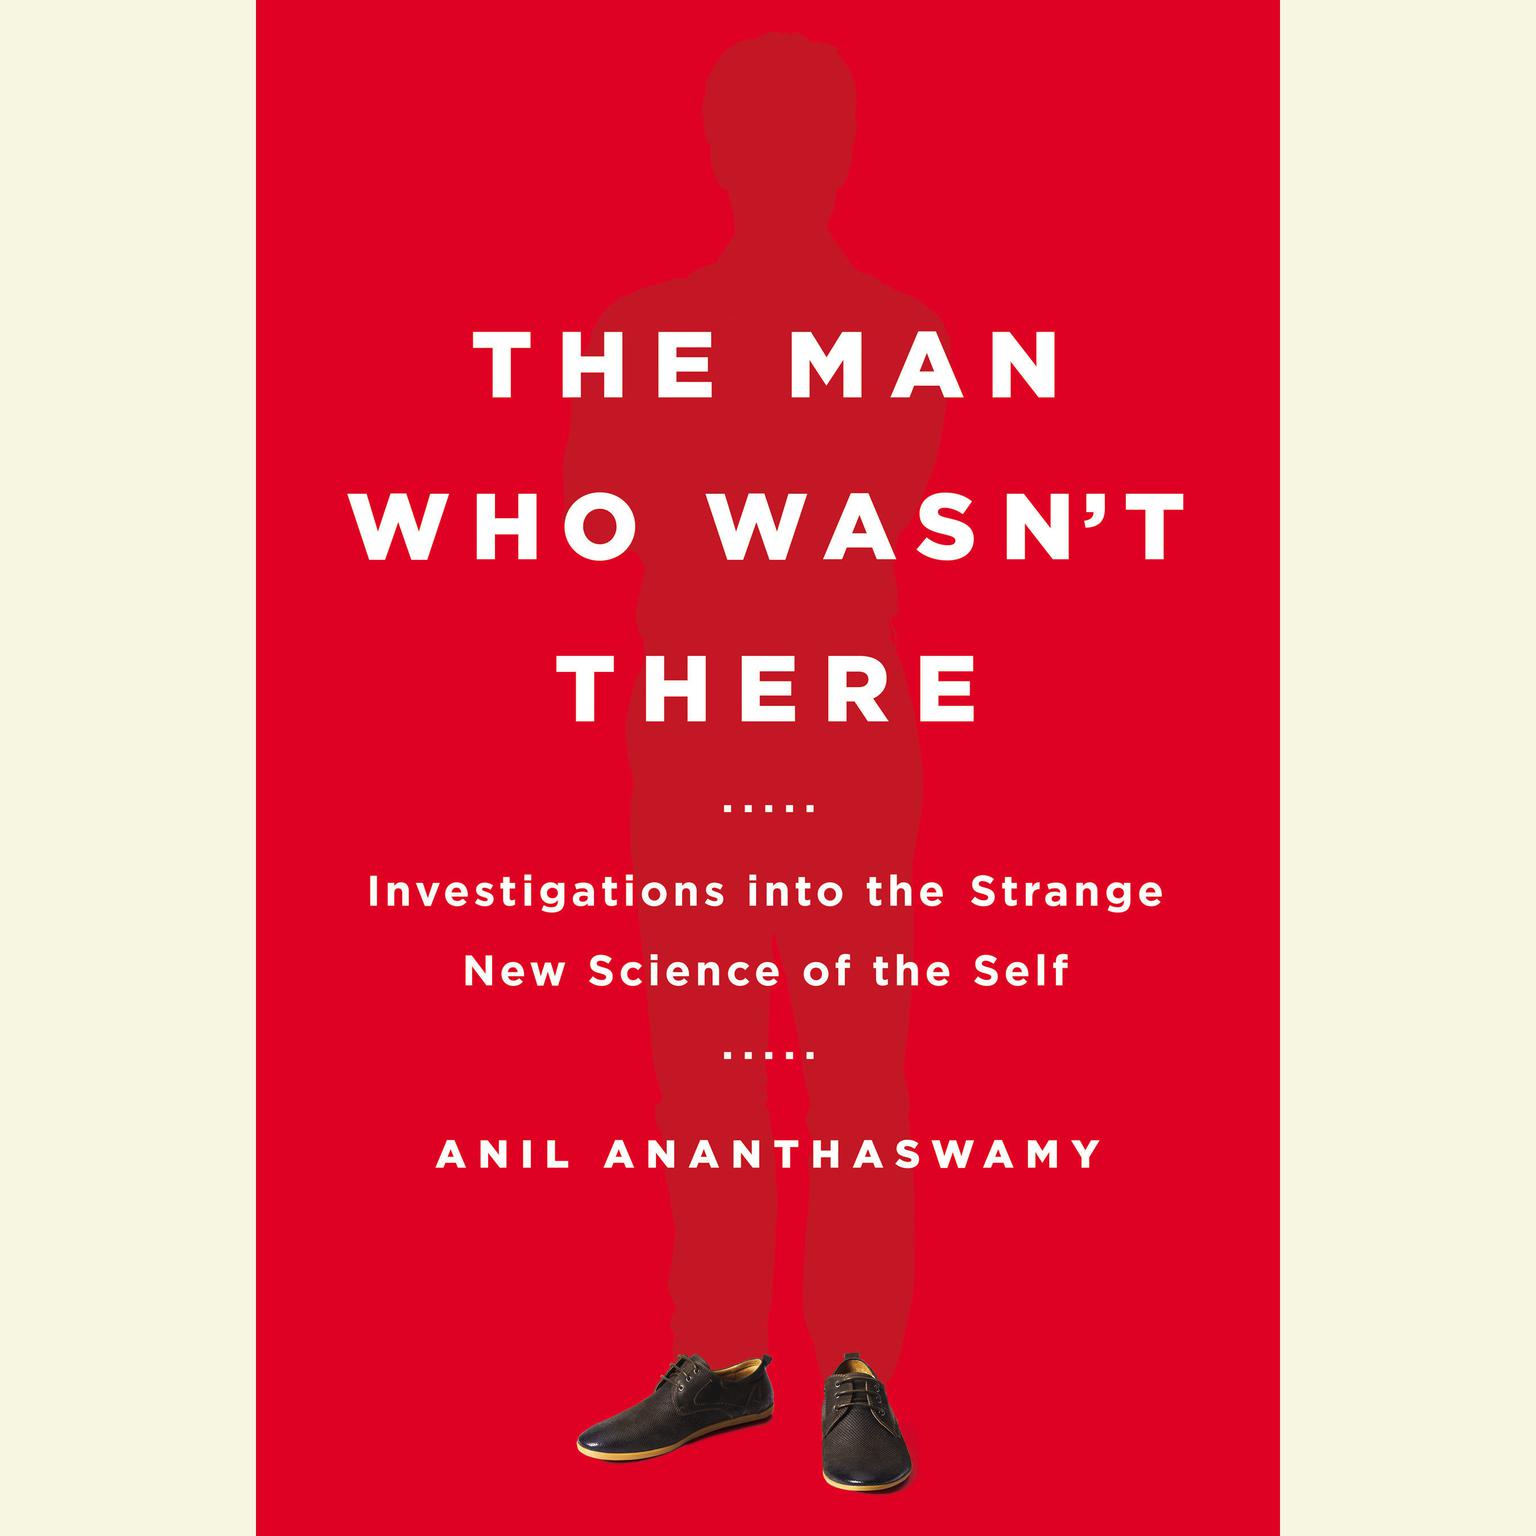 The Man Who Wasnt There: Investigations into the Strange New Science of the Self Audiobook, by Anil Ananthaswamy